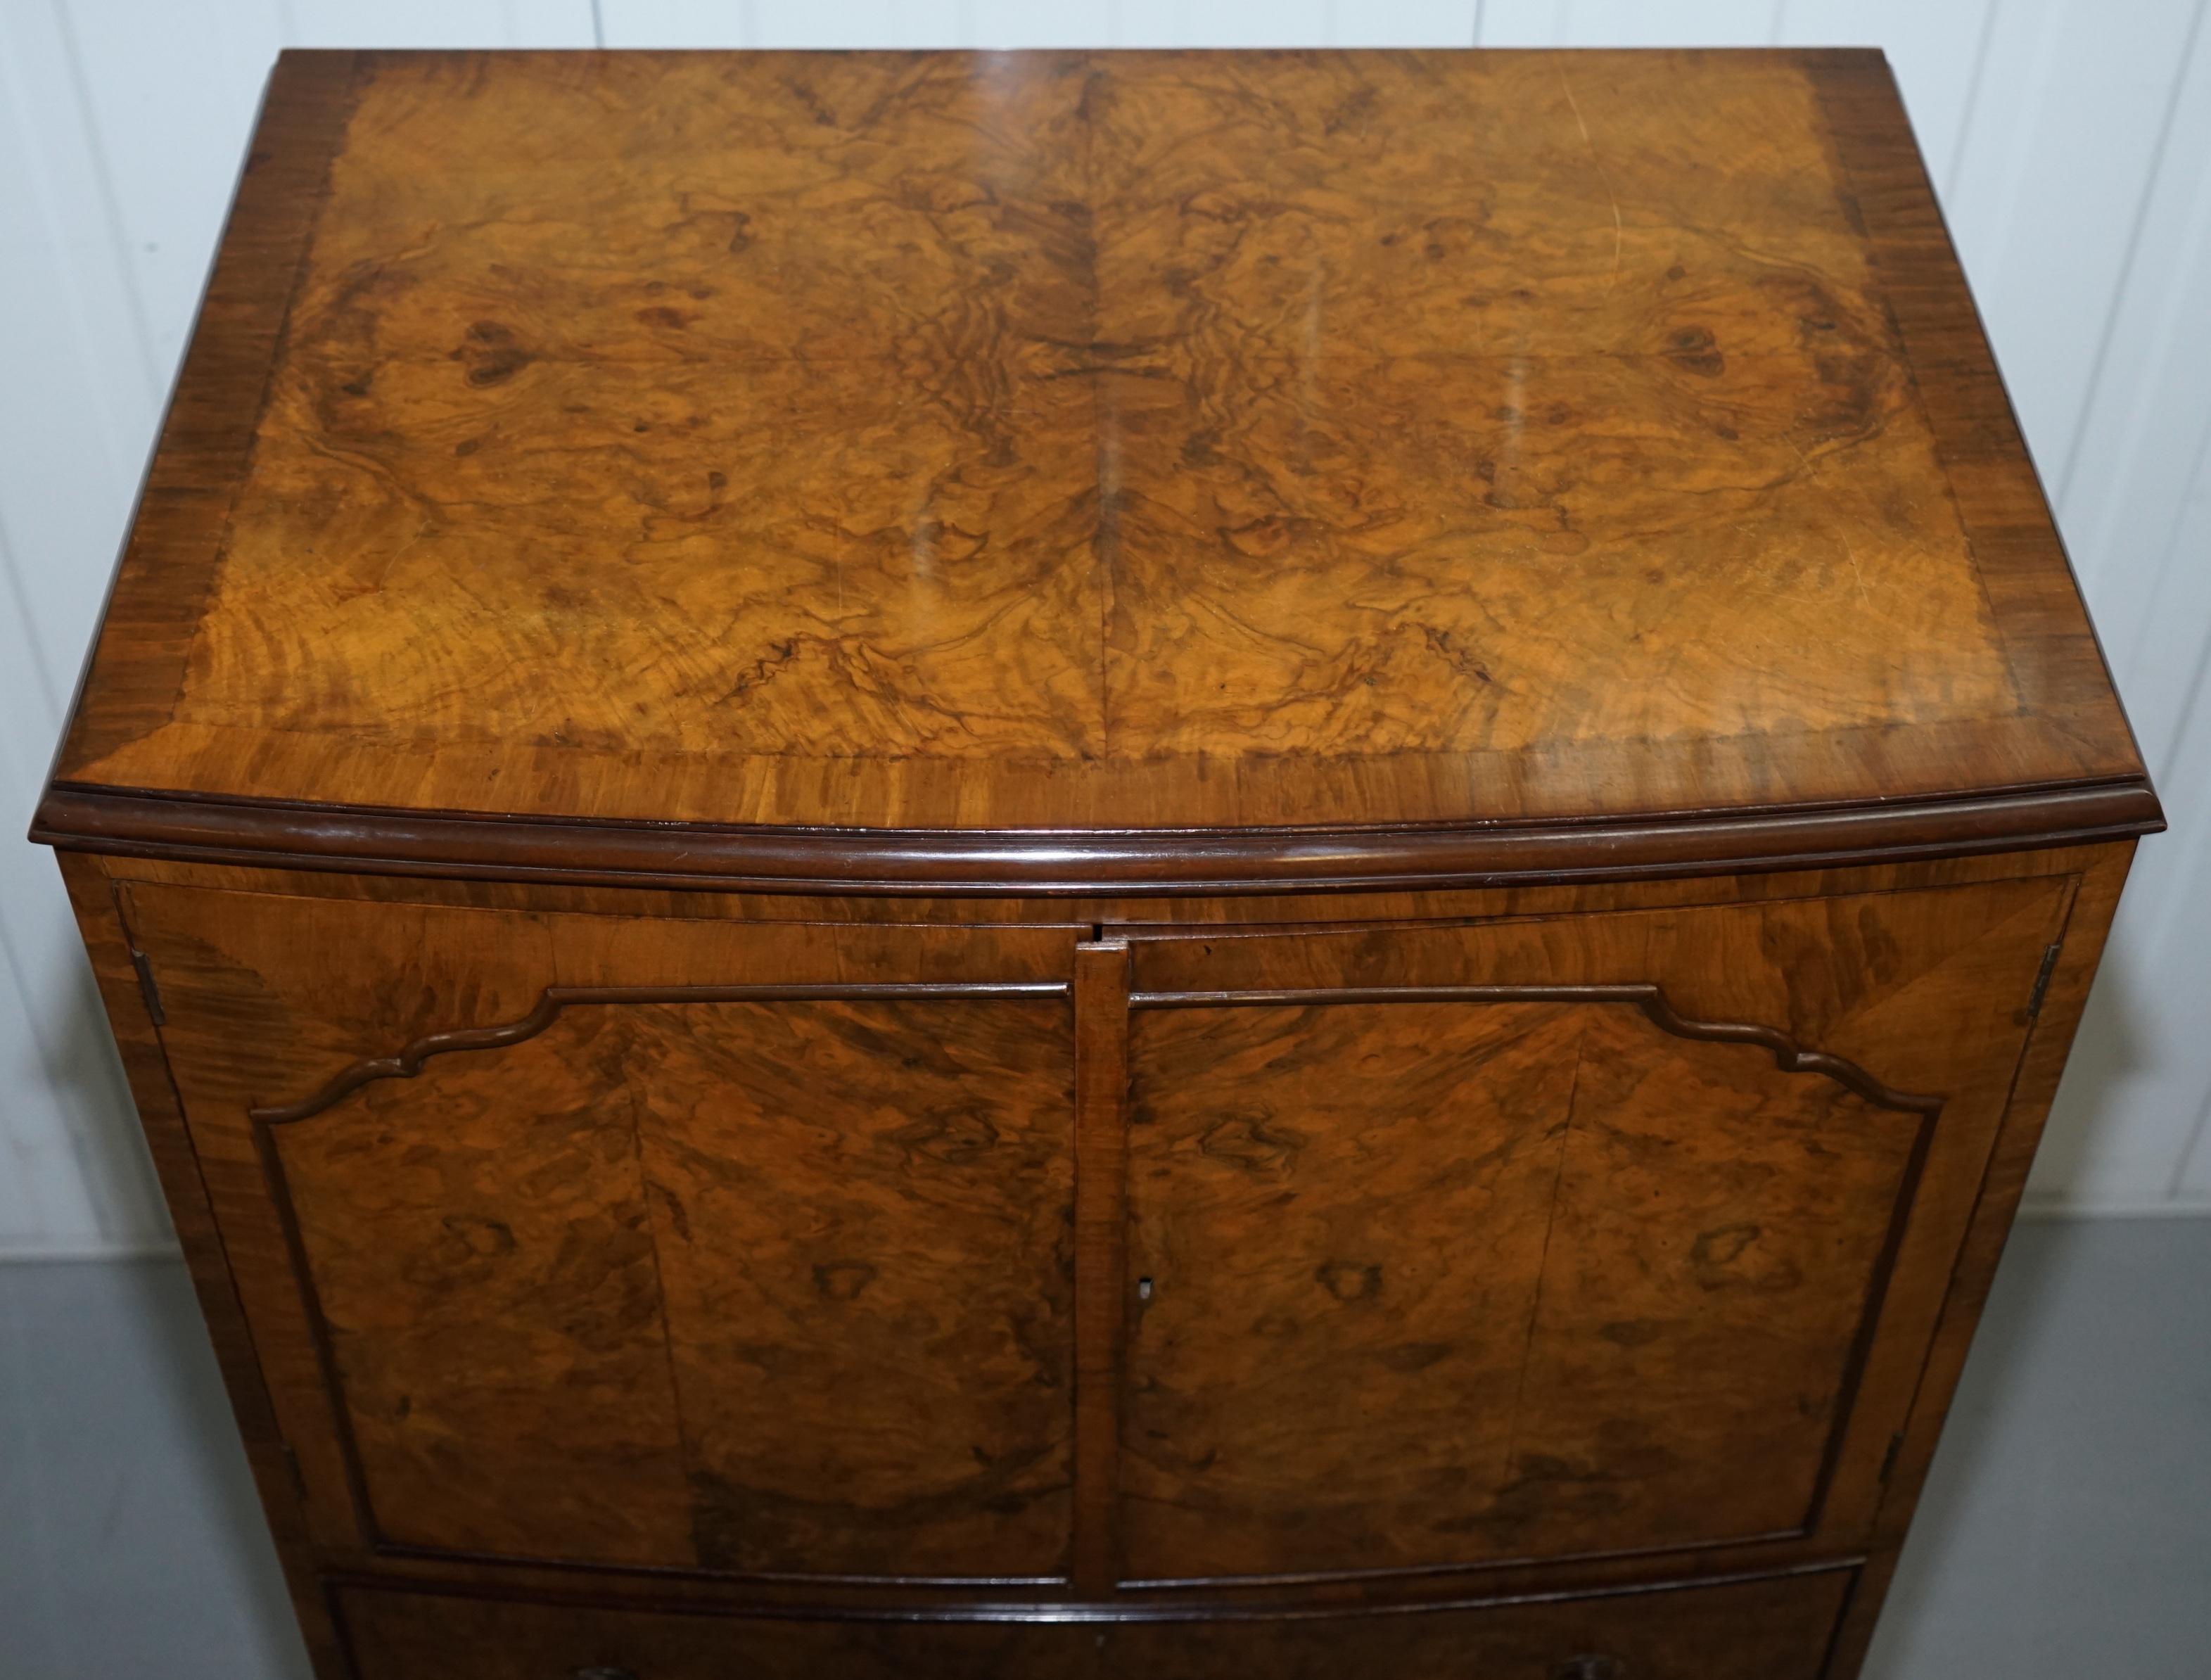 Hand-Carved Stunning Art Deco Burr Walnut Cabinet Cupboard Chest of Drawers Drinks Unit